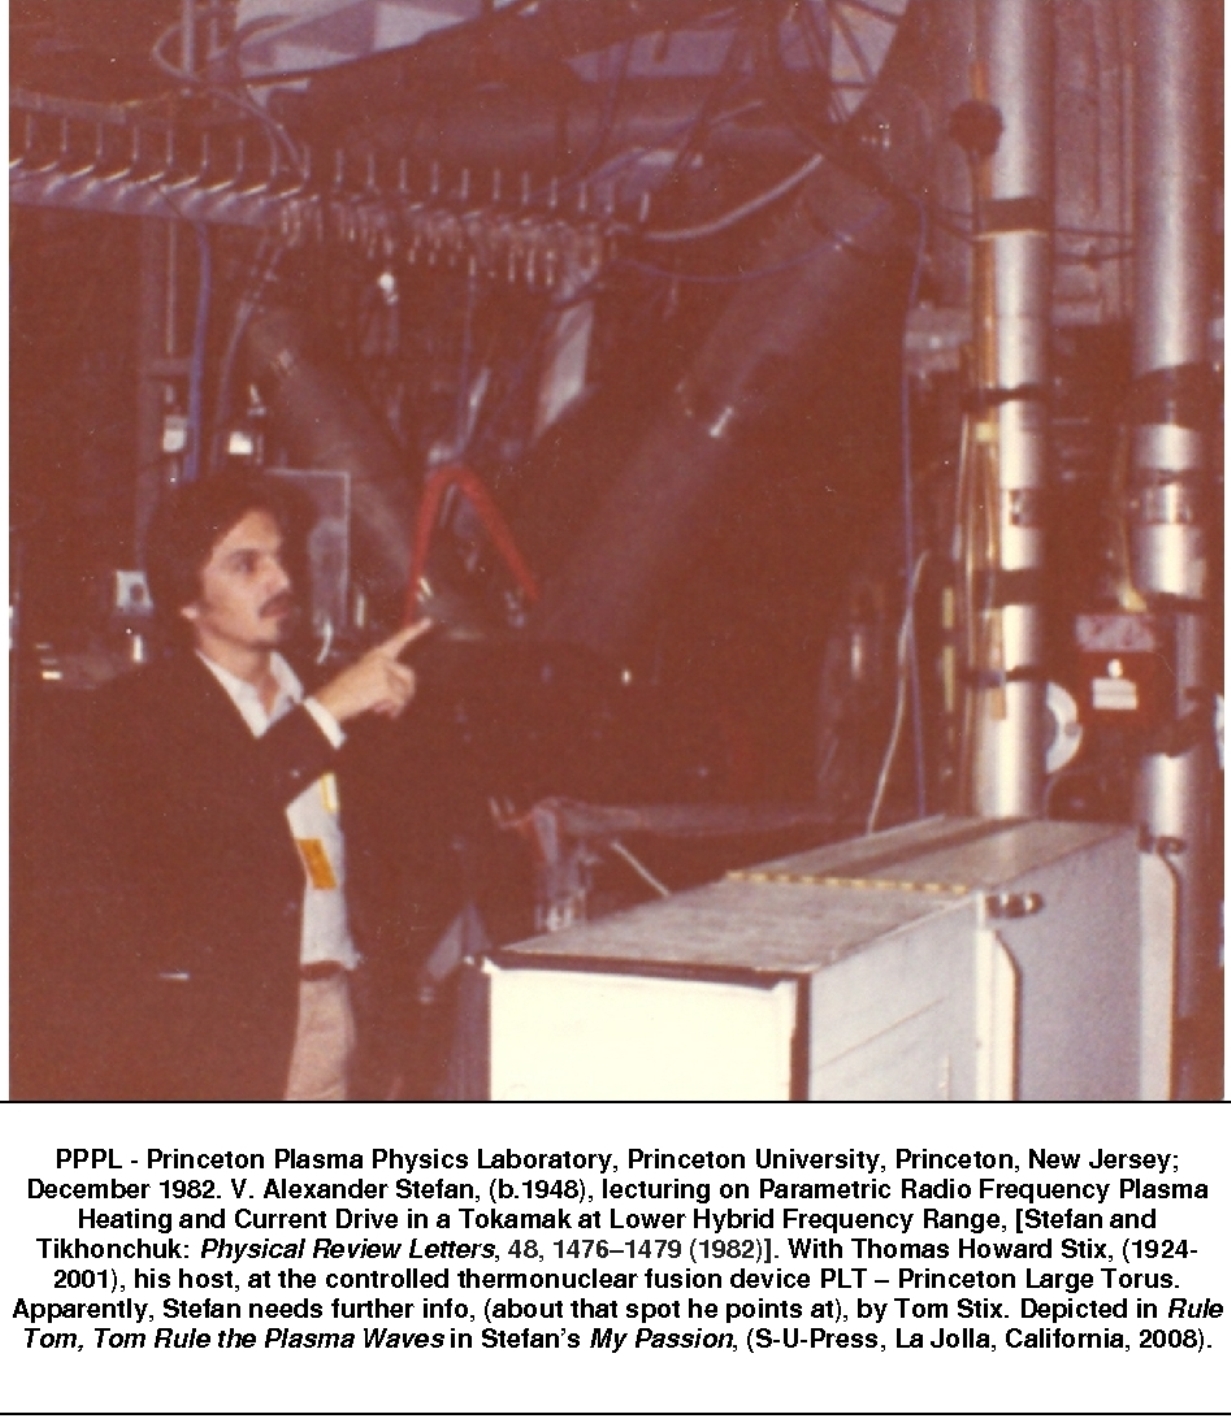 PPPL - Princeton Plasma Physics Laboratory, Princeton University, Princeton, New Jersey; December 1982. V. Alexander Stefan, (b.1948), lecturing on Parametric Radio Frequency Plasma Heating and Current Drive in a Tokamak at Lower Hybrid Frequency Range, [Stefan and Tikhonchuk: Physical Review Letters, 48, 14761479 (1982)]. With Thomas Howard Stix, (1924-2001), his host, at the controlled thermonuclear fusion device PLT  Princeton Large Torus. Apparently, Stefan needs further info, (about that spot he points at), by Tom Stix. Depicted in Rule Tom, Tom Rule the Plasma Waves in Stefans My Passion, (S-U-Press, La Jolla, California, 2008).